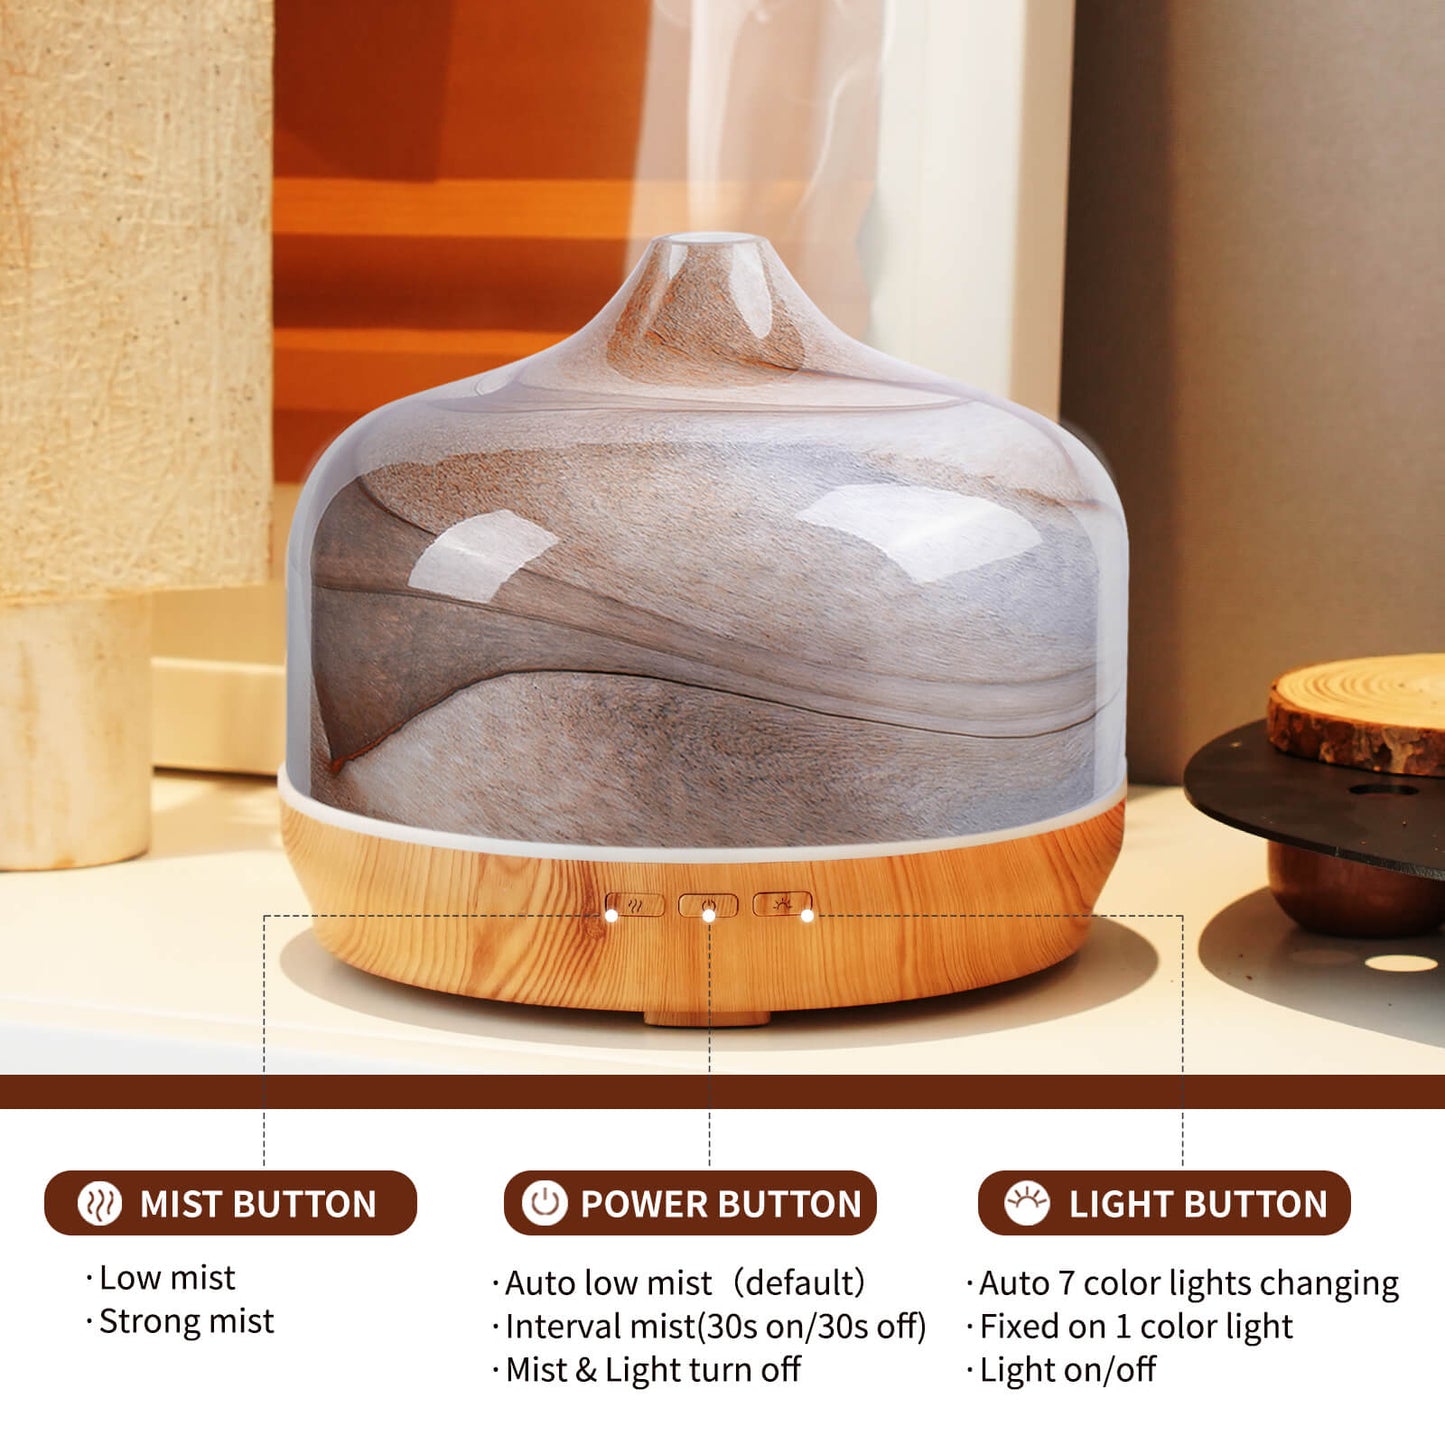 Porseme 500ml Glass Essential Oil Diffuser Aromatherapy Ultrasonic Cool Mist Humidifier 15-21 Running Hours Waterless Auto-Off Air Diffusers for Sleeping,Yoga,Office Working,Spa and Rest (Desert)